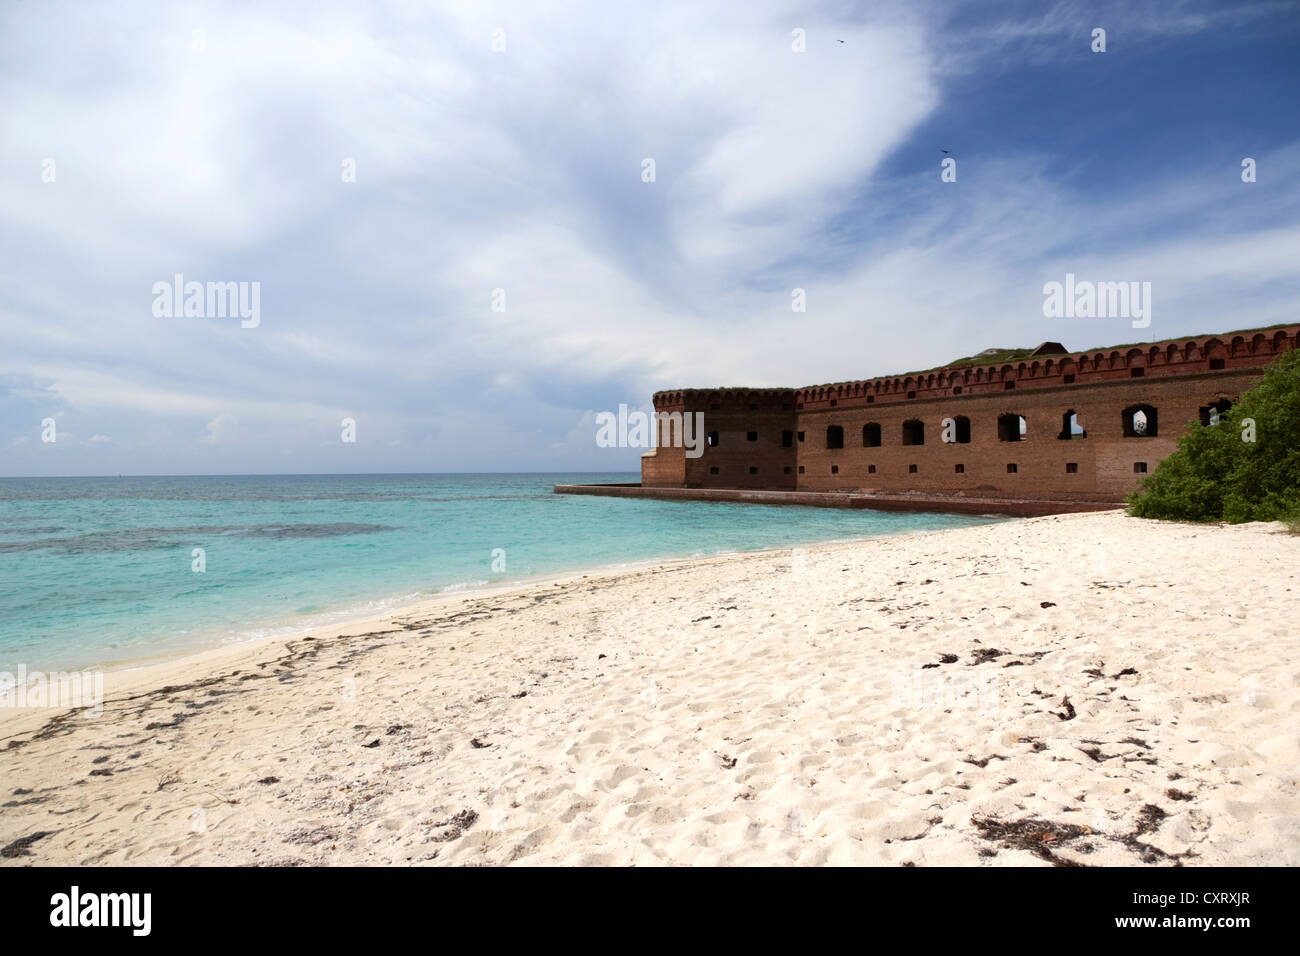 beach in front of fort jefferson brick walls with moat dry tortugas national park florida keys usa Stock Photo